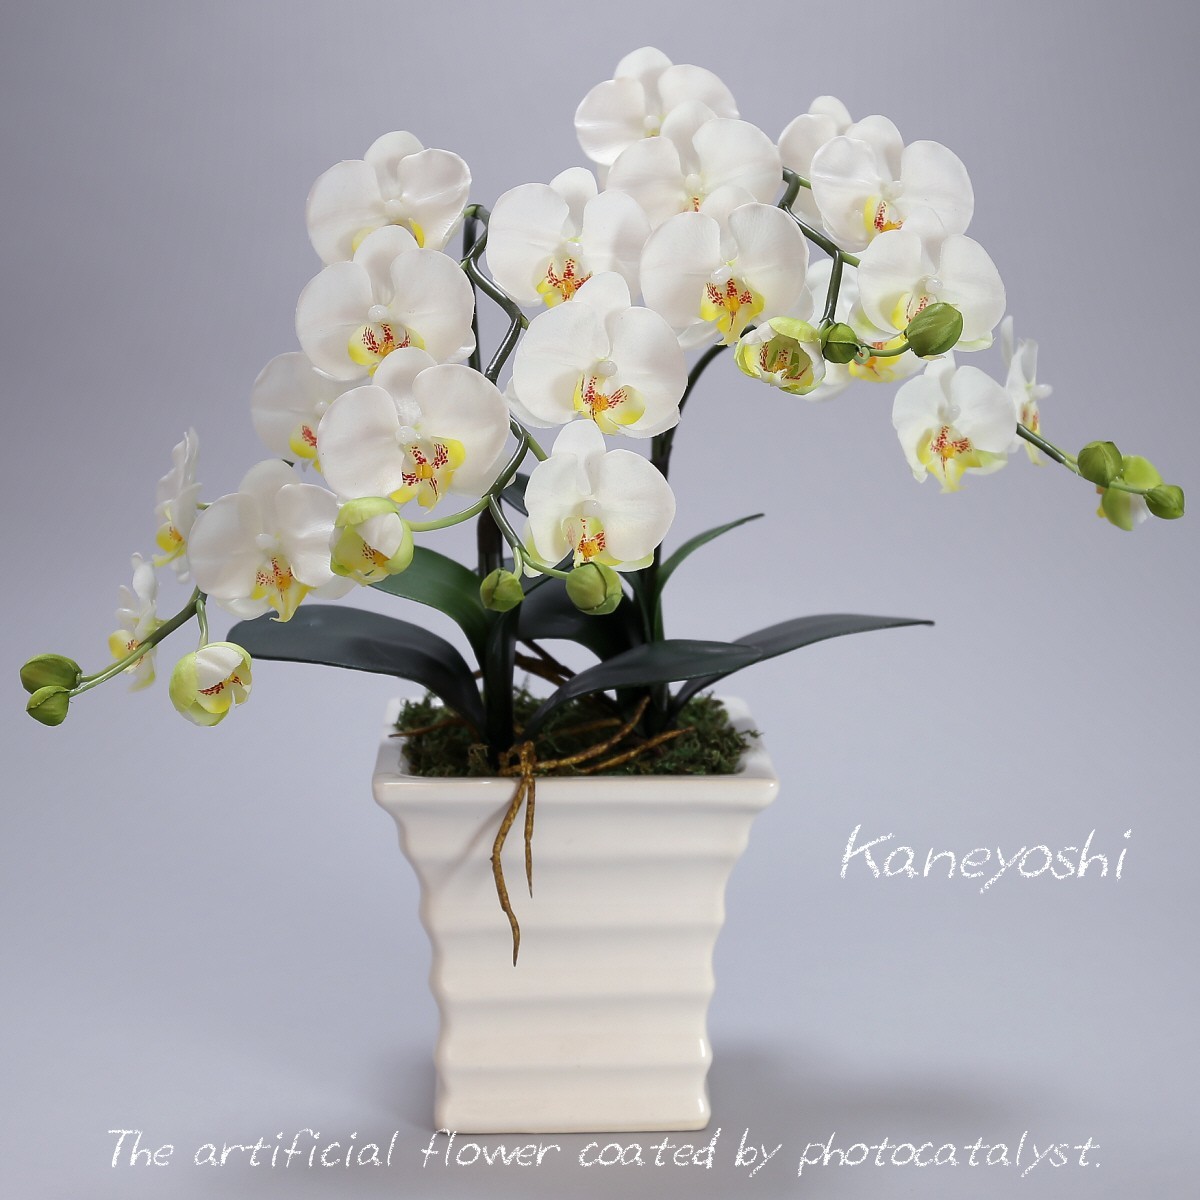 Photocatalyst Phalaenopsis Artificial Flower Interior Small Flower 2 Stems White B White Color Celebration Gift Souvenir Birthday Presentation New House Opening Flower Fake Green Air Purifier, Handcraft, Handicrafts, Art Flower, Pressed flowers, Finished Product